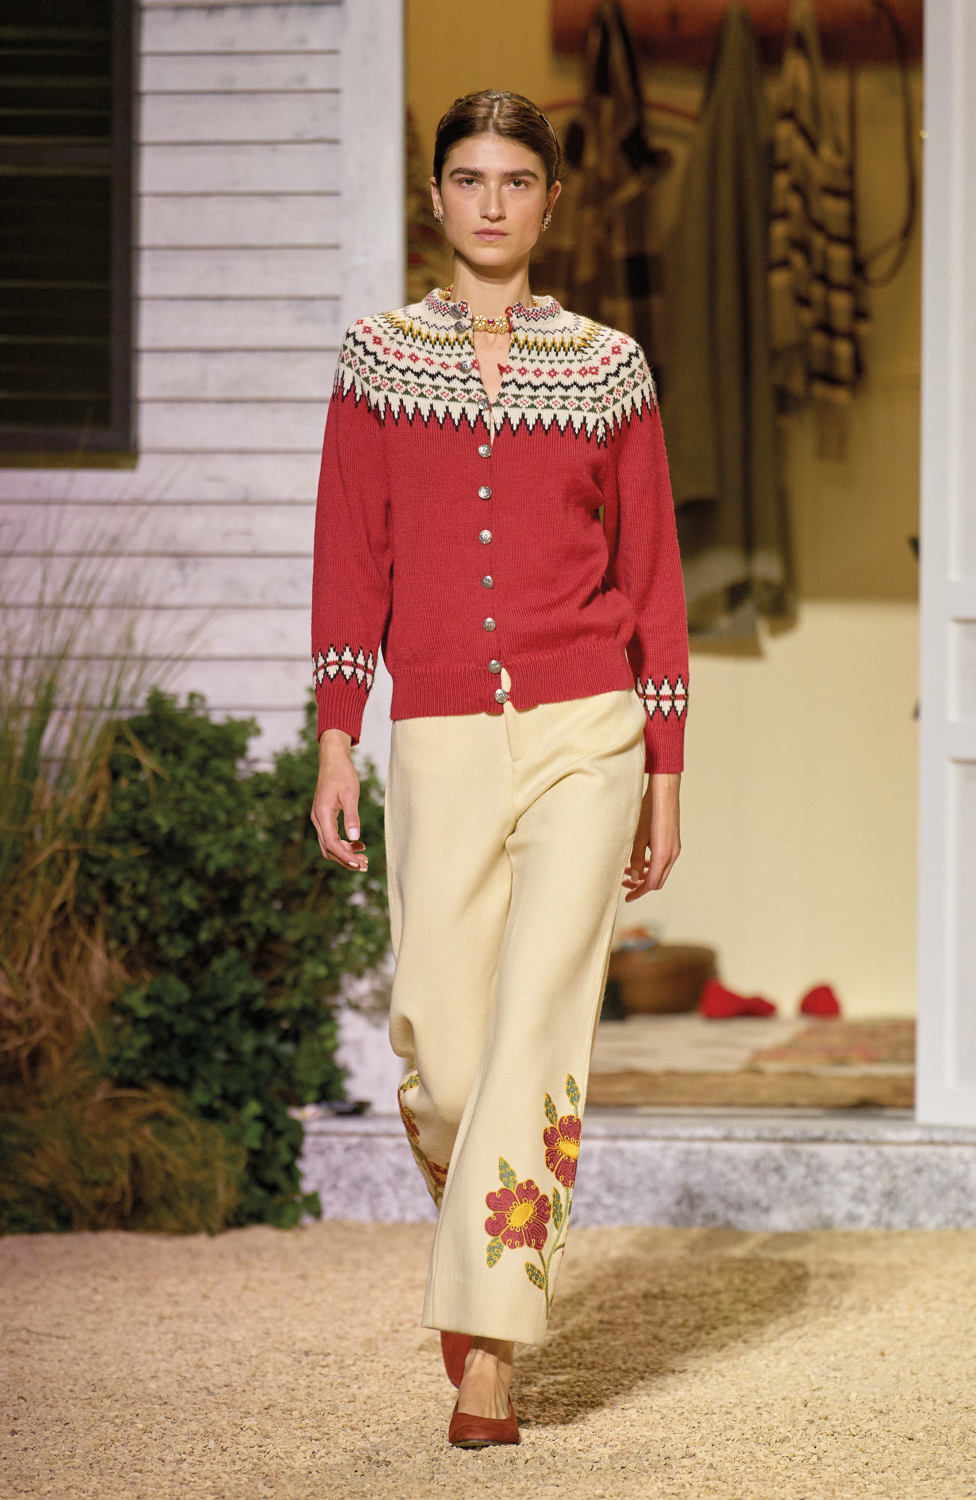 woman in front of house wearing red top and beige pants